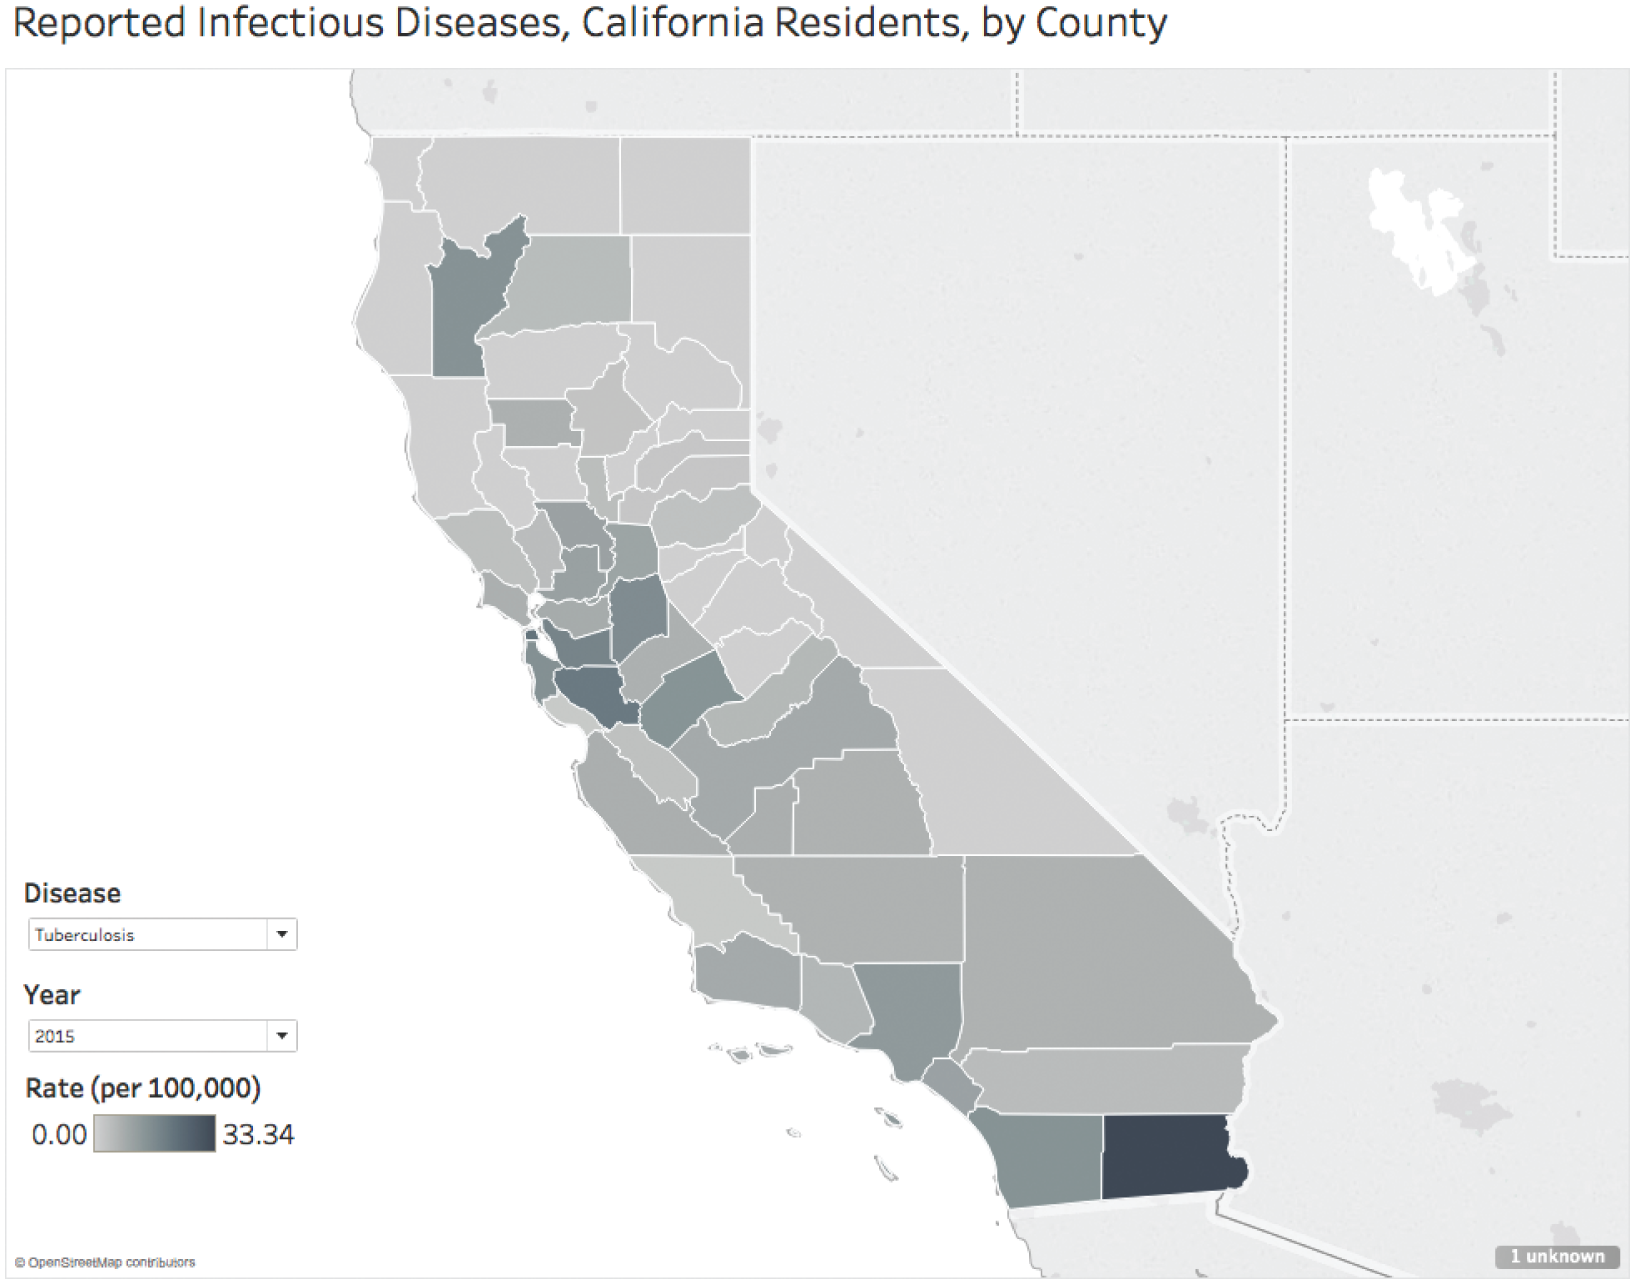 Choropleth map reporting tuberculosis infections in California residents, by county, in the year 2015.